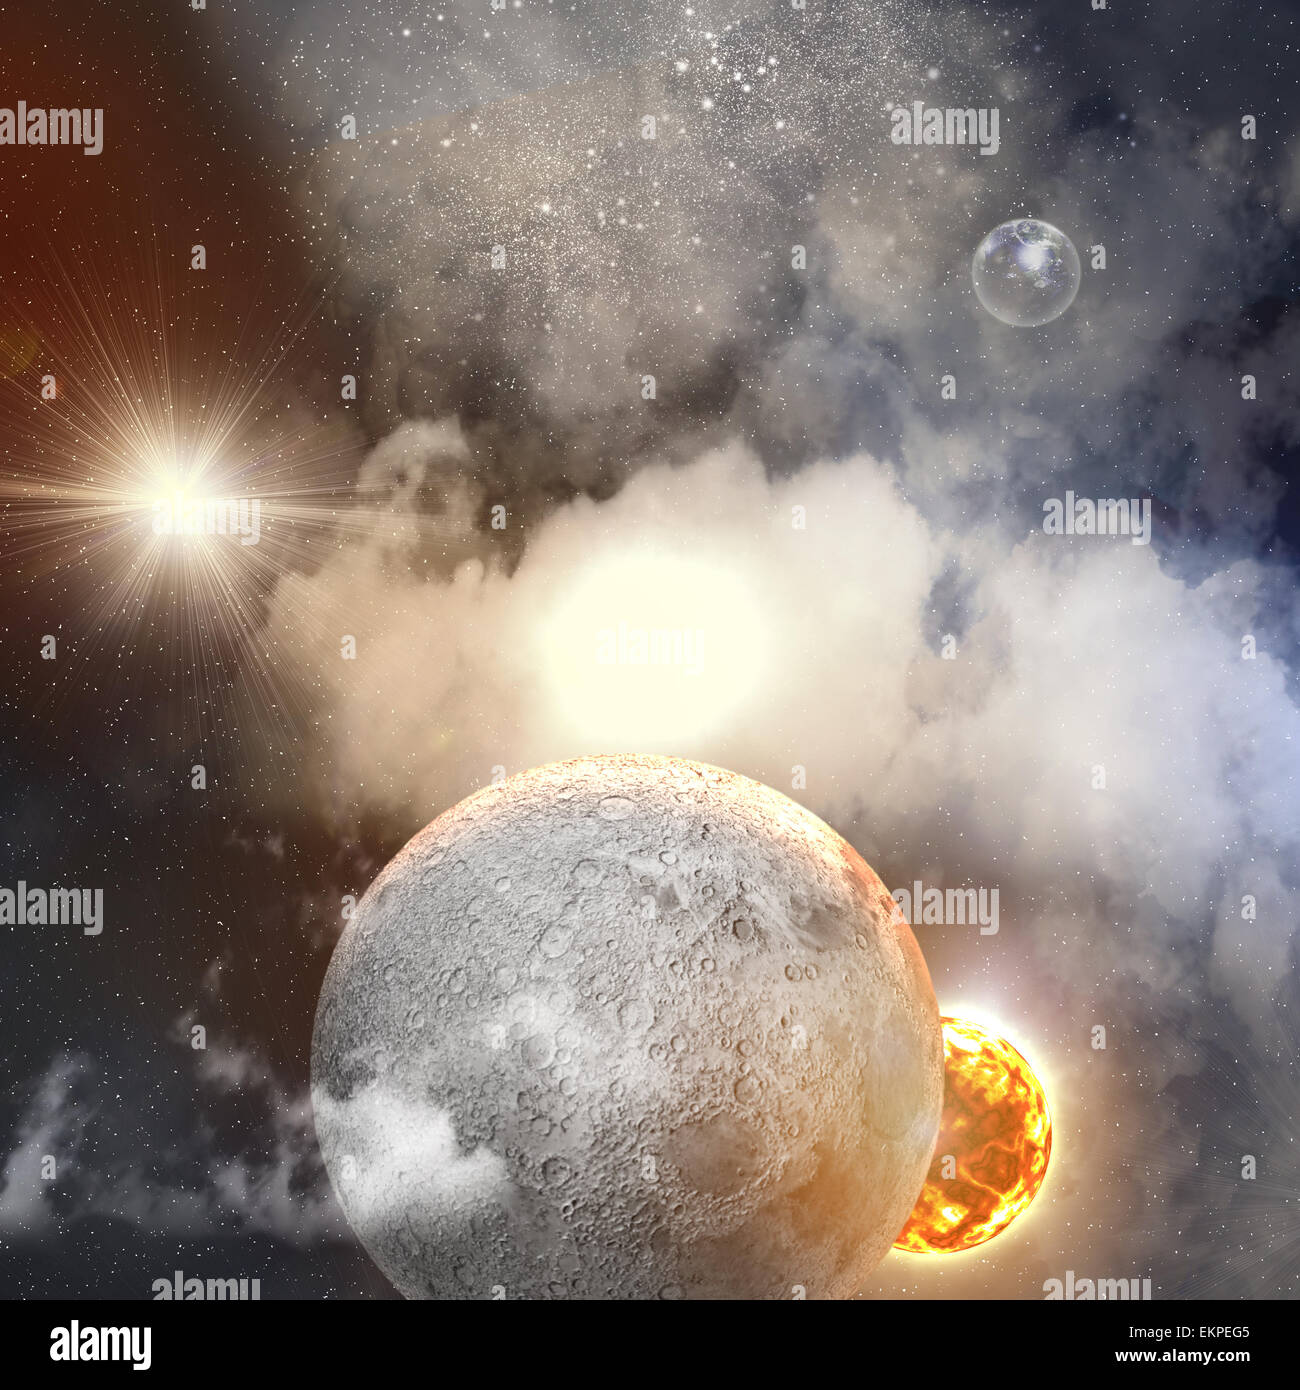 Image of planets in space Stock Photo